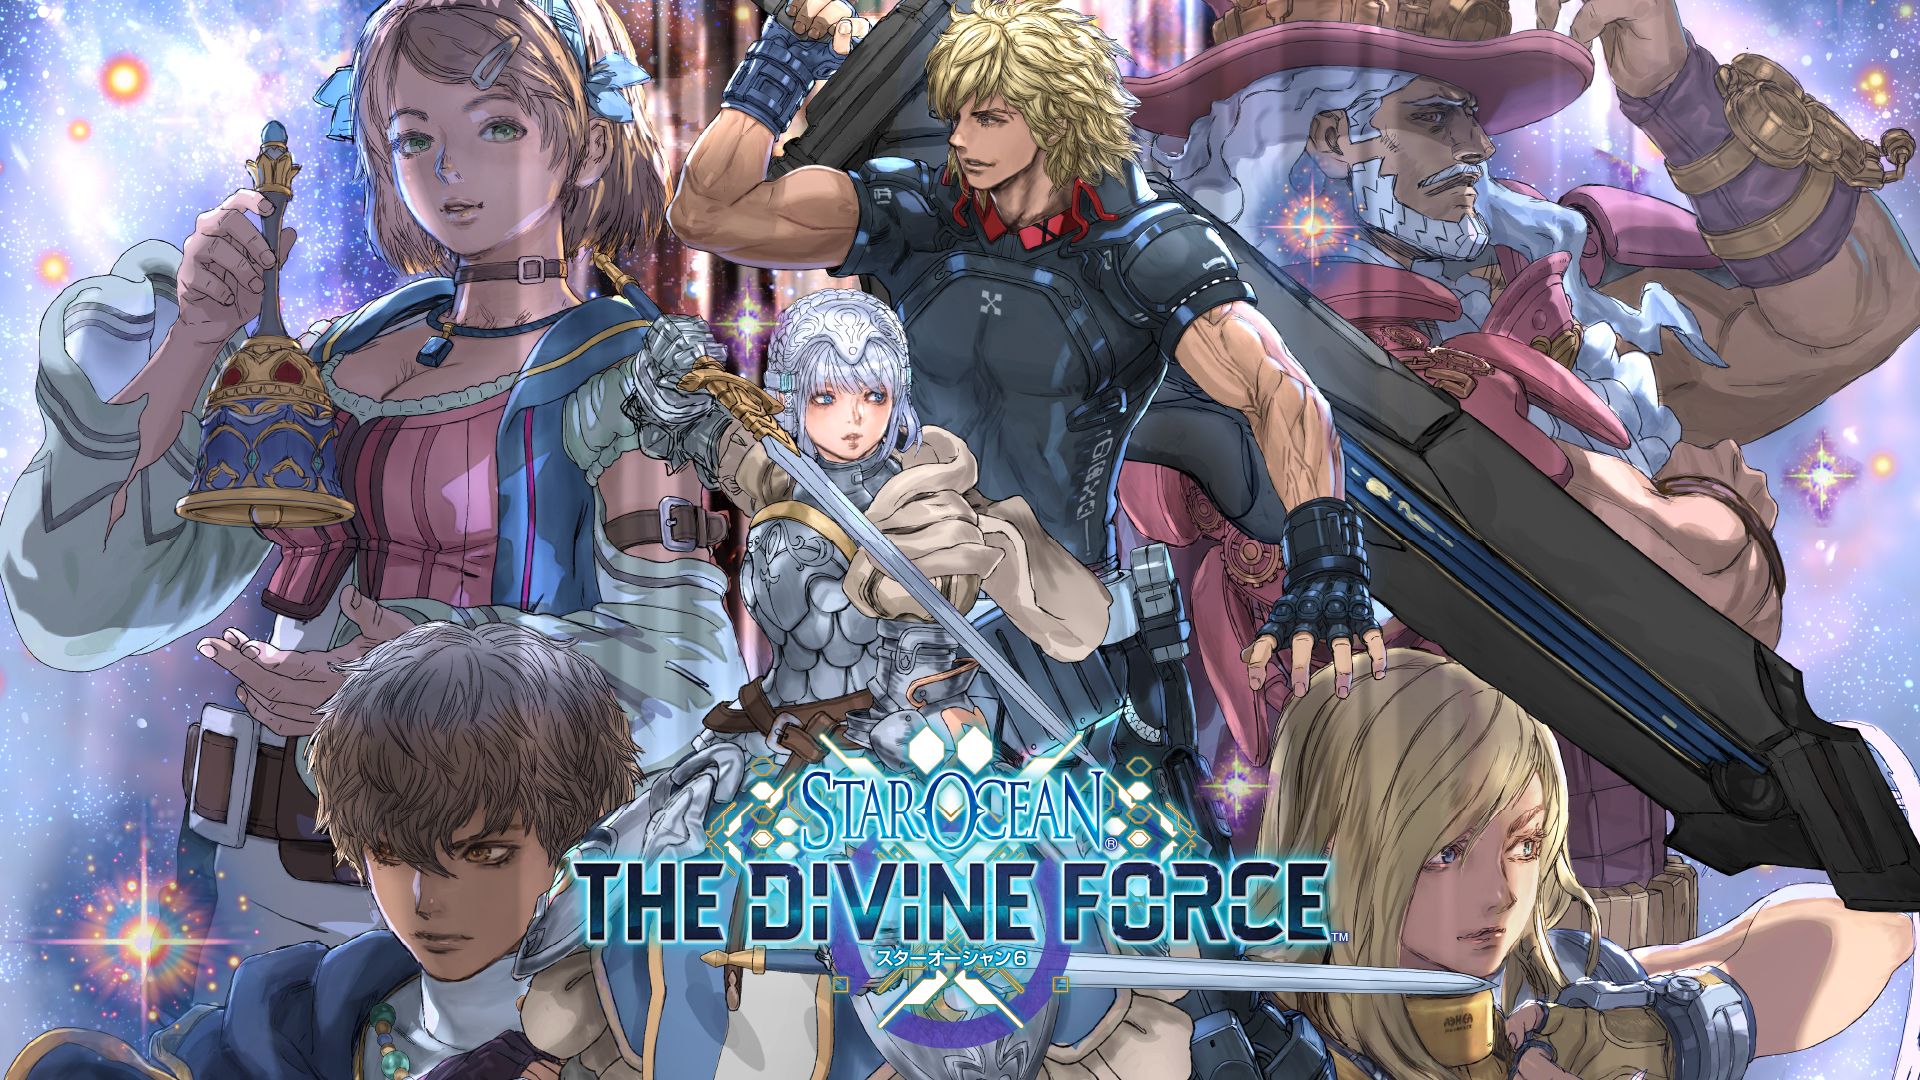 Star Ocean: The Divine Force will be released on October 27